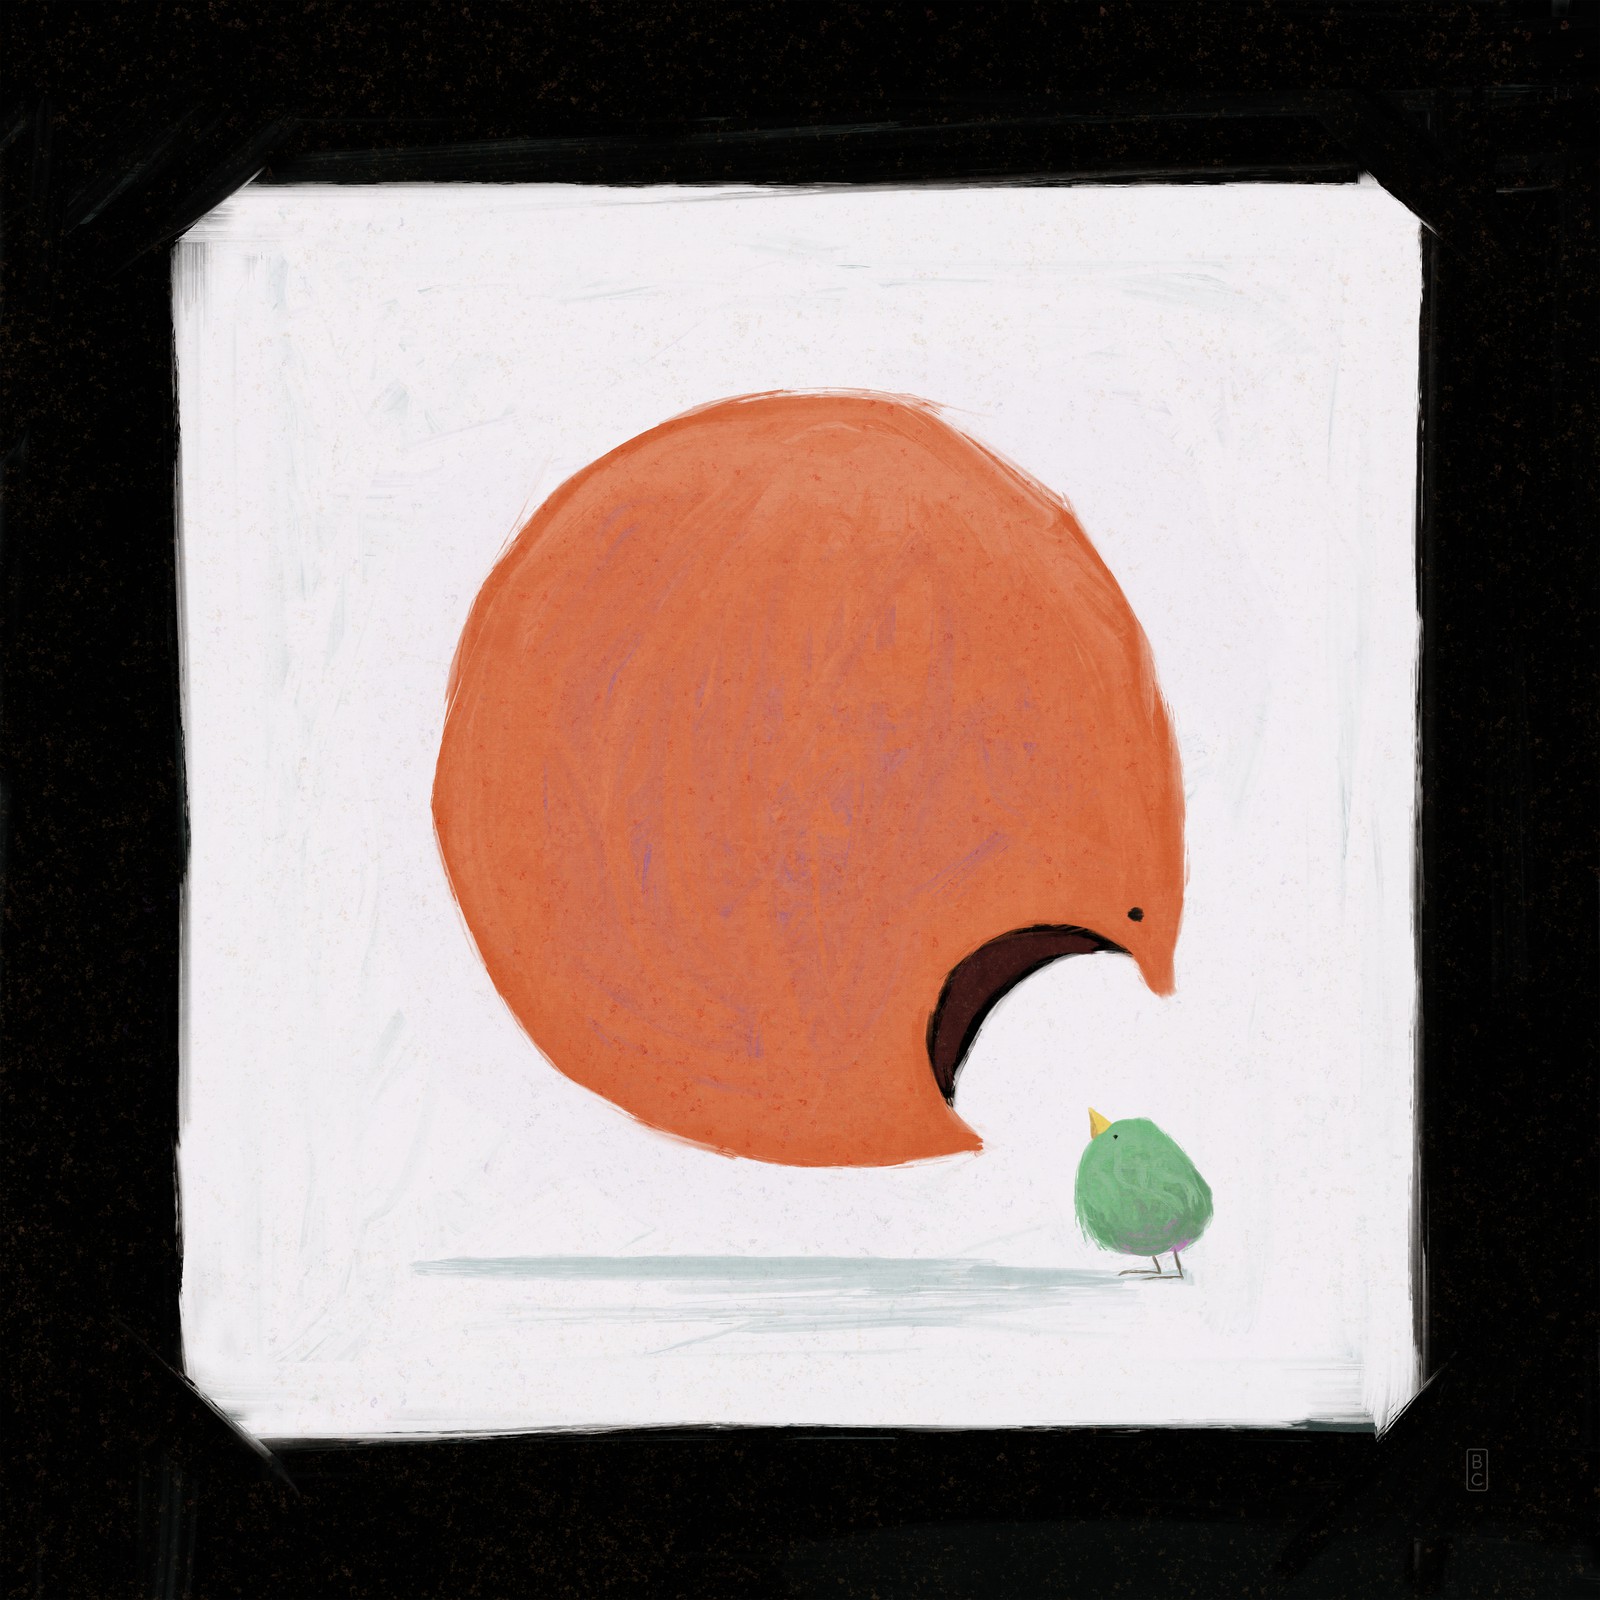 A large orange circle with its mouth open ready to eat a small green bird-like creature.